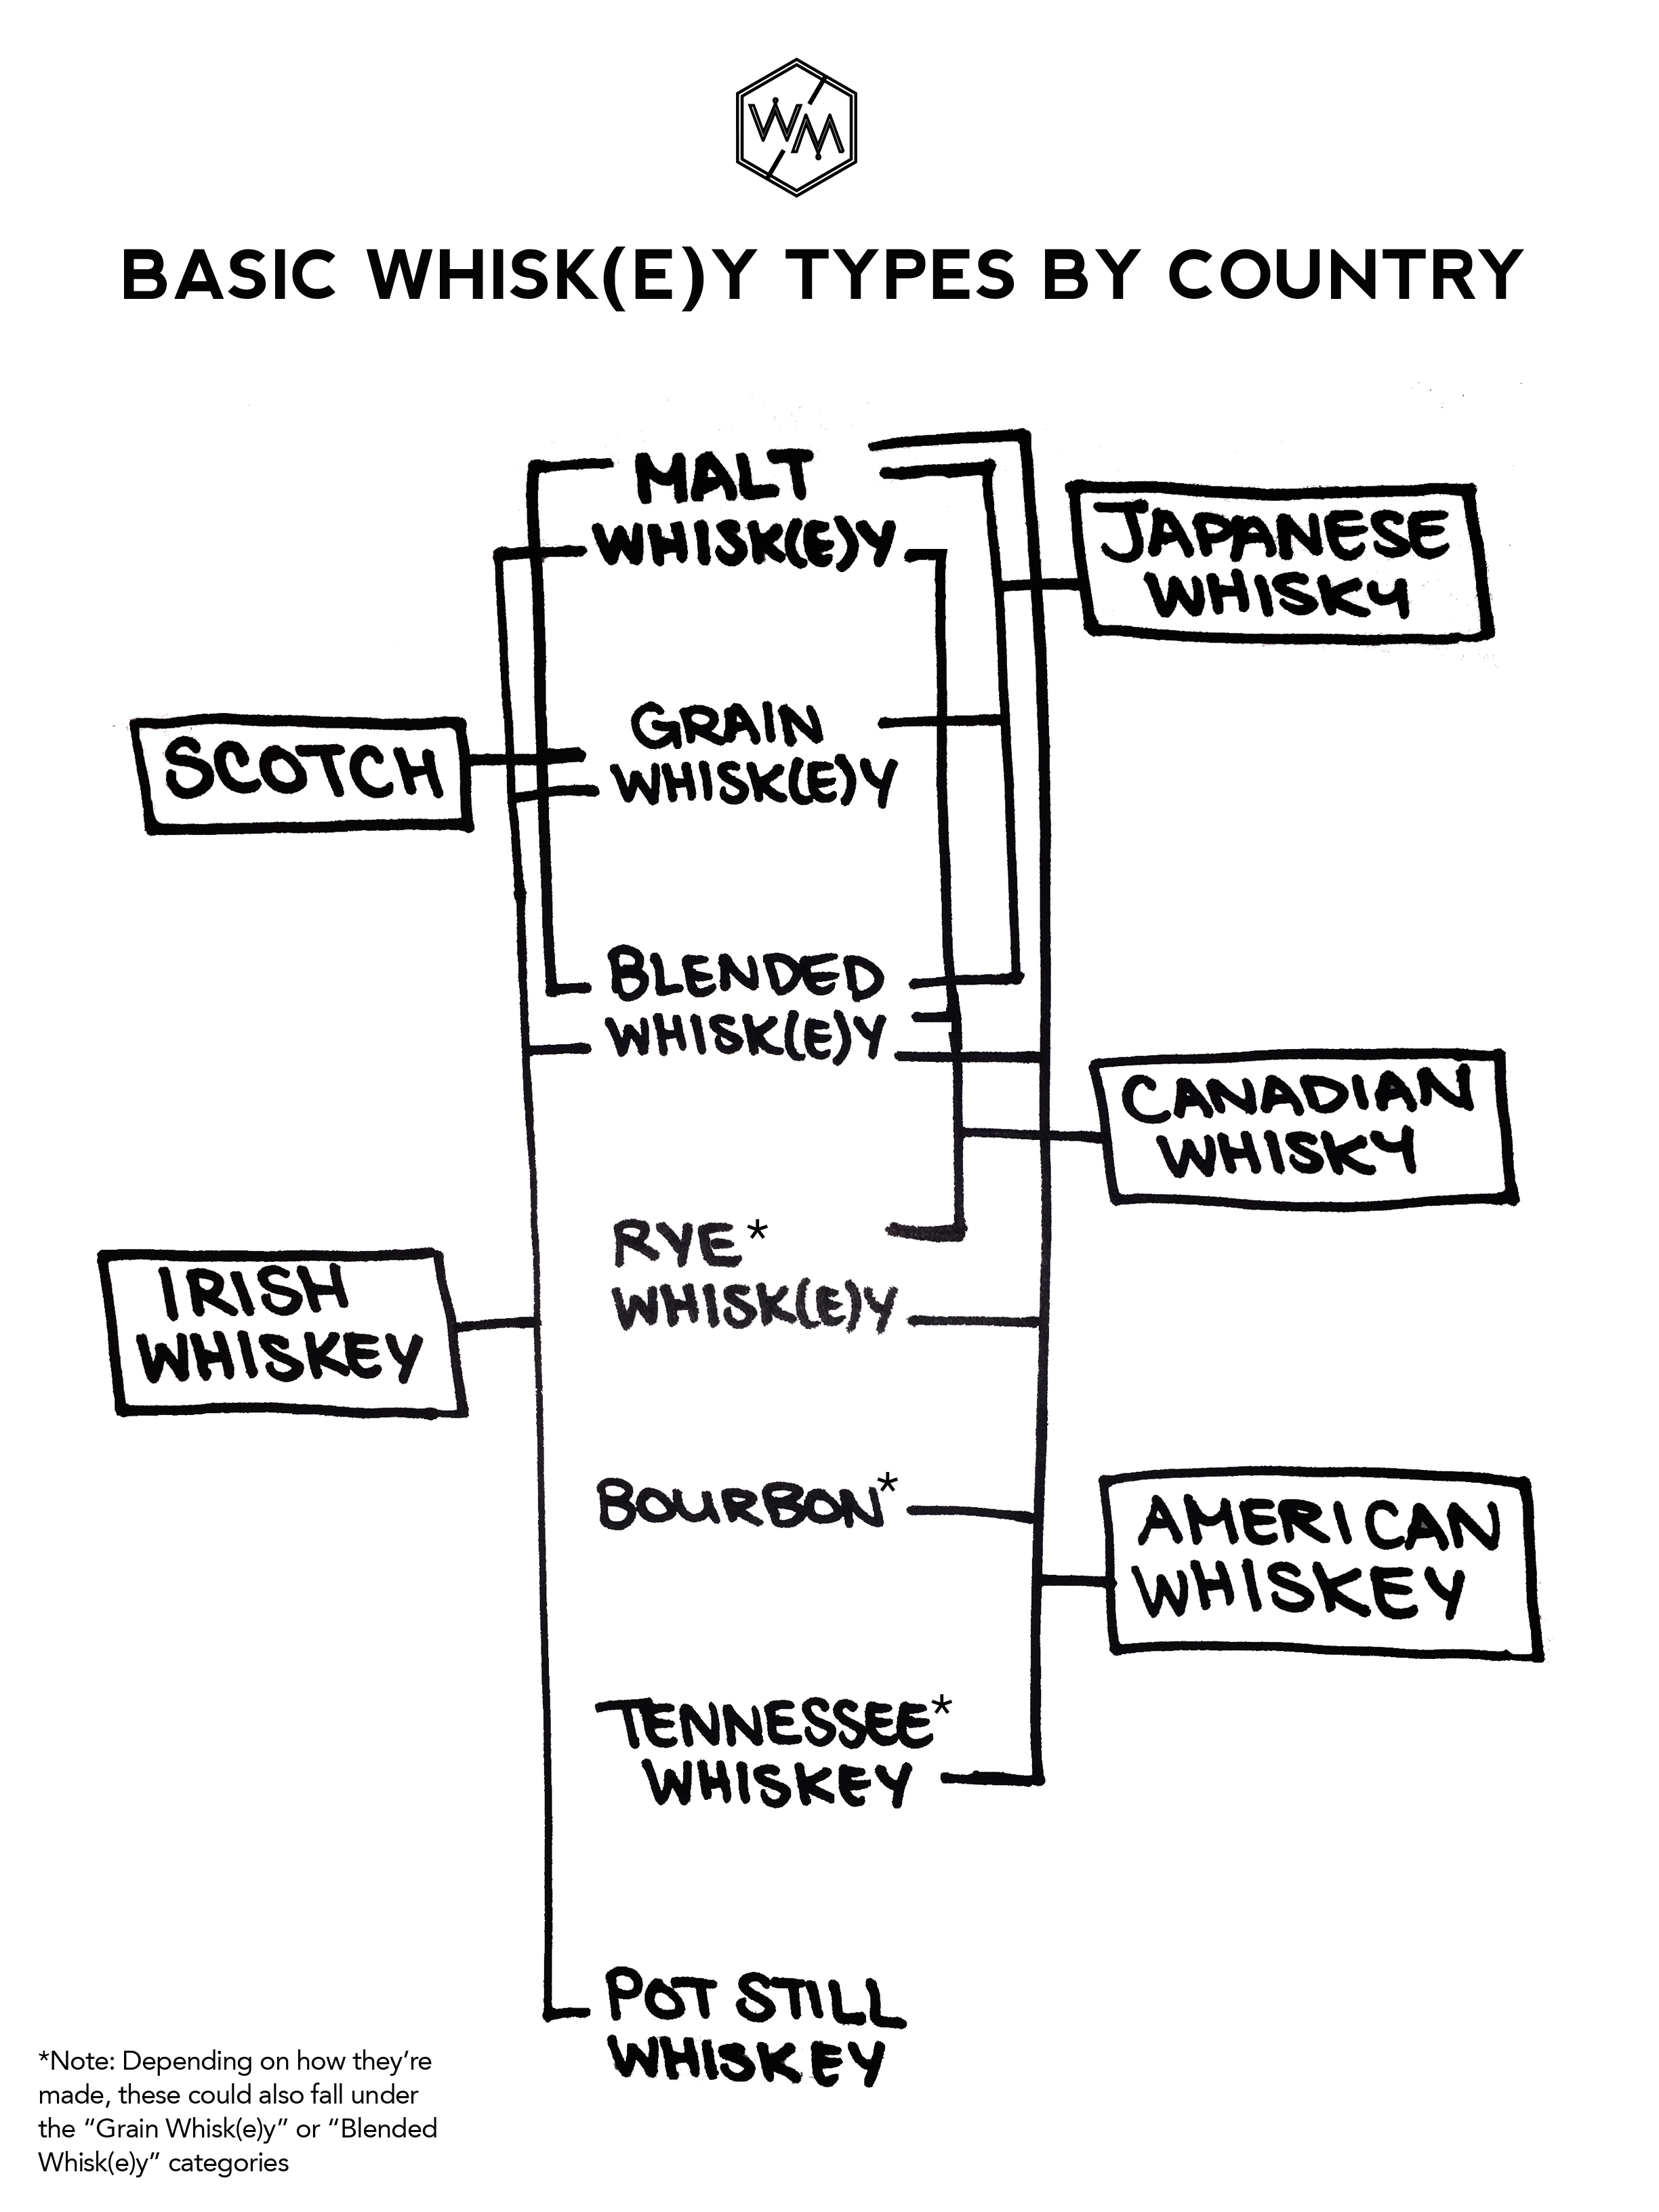 http://whiskeymuse.com/wp-content/uploads/2017/01/Whisky-Type-by-Country.jpg